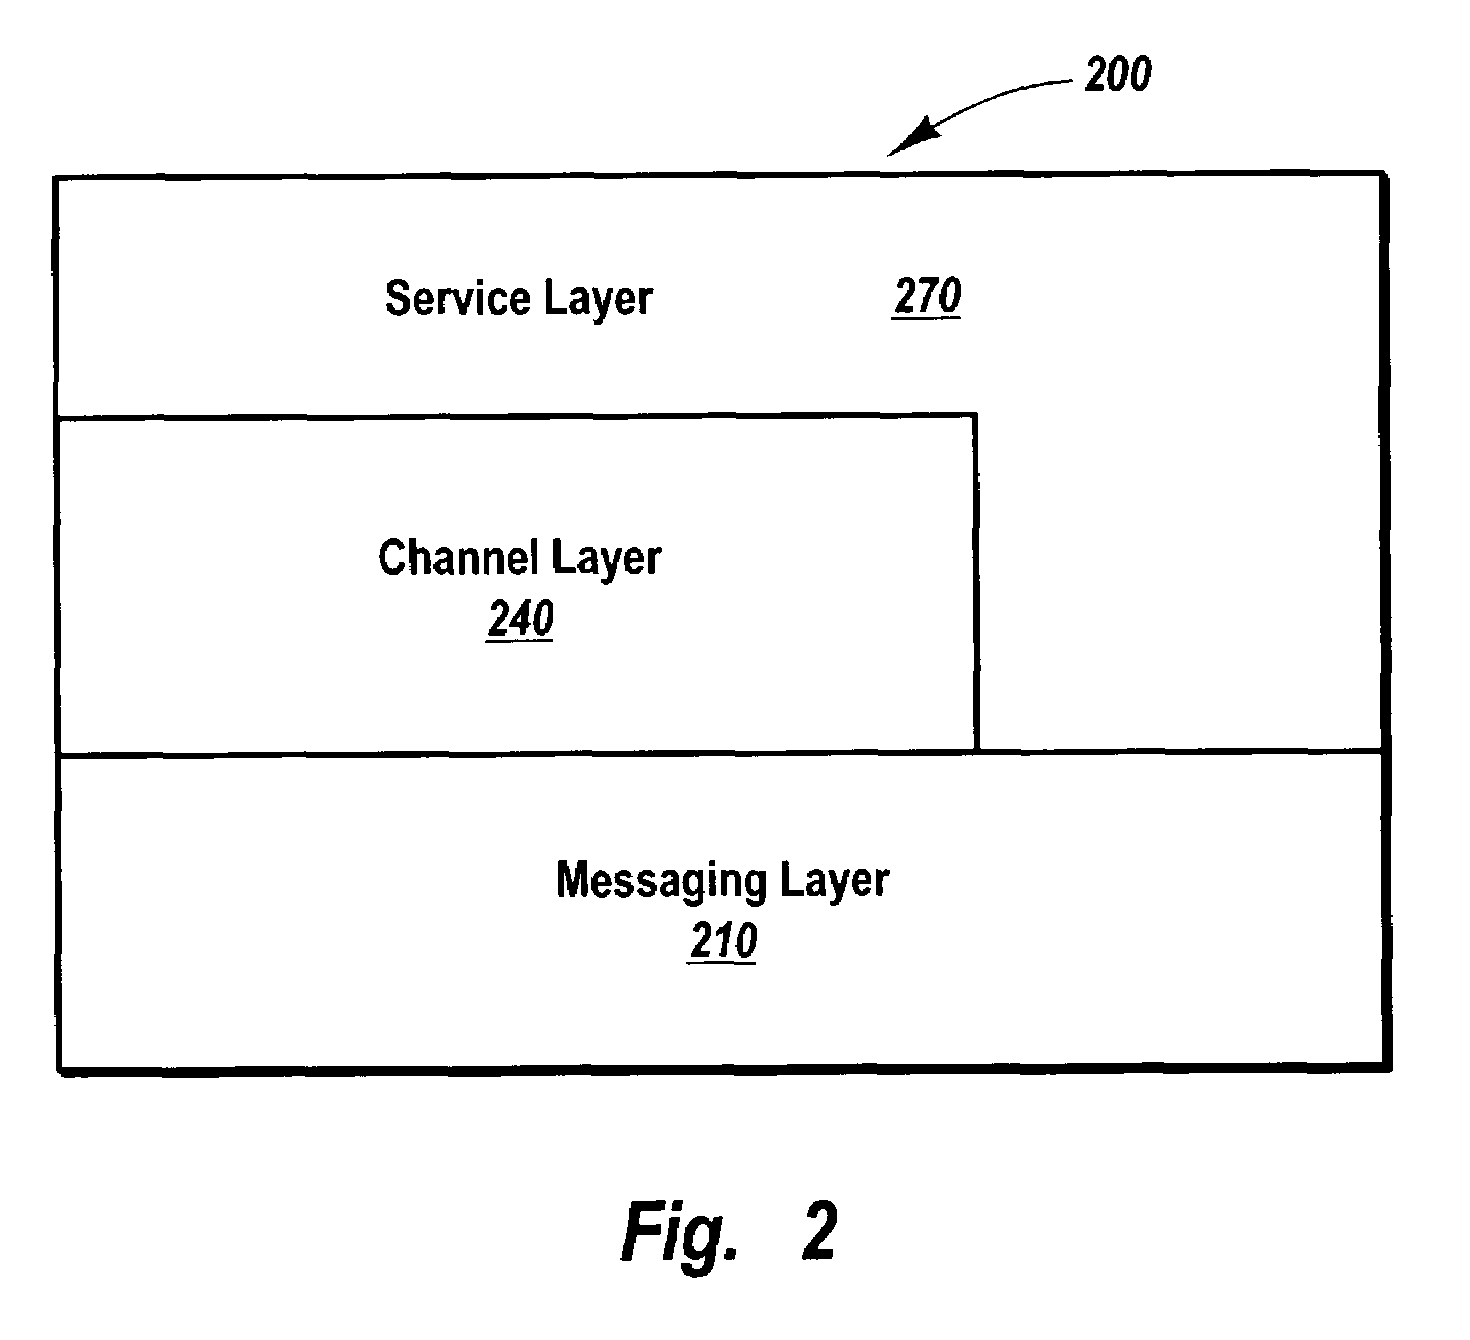 Transmitting and receiving messages through a customizable communication channel and programming model